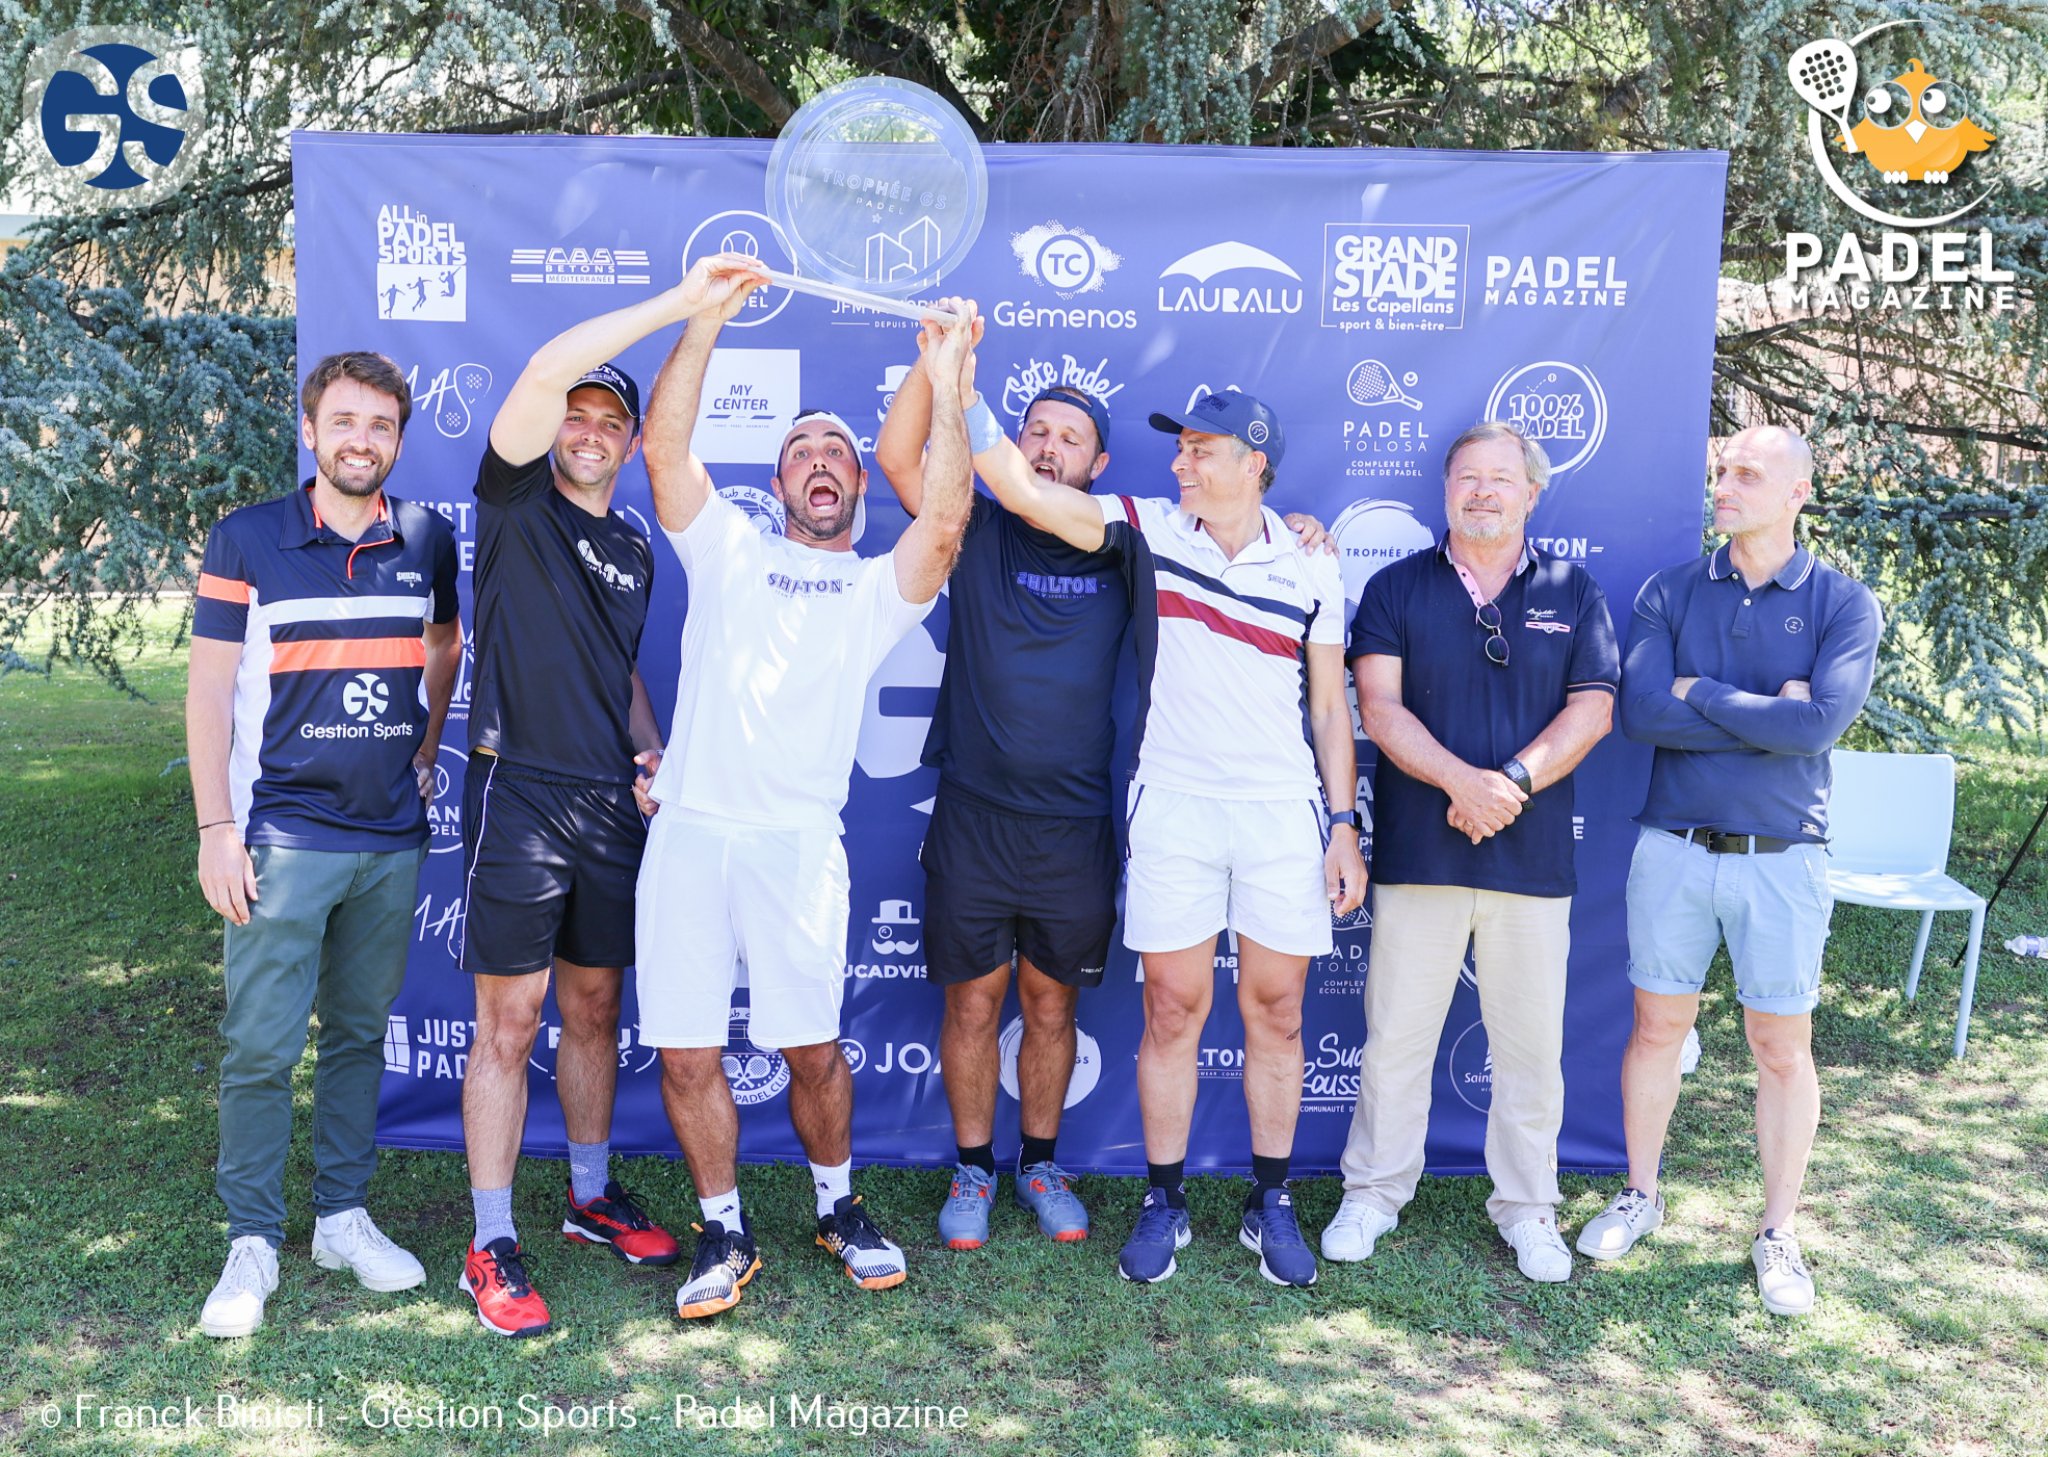 Palavas lifts the Gestion Sports trophy